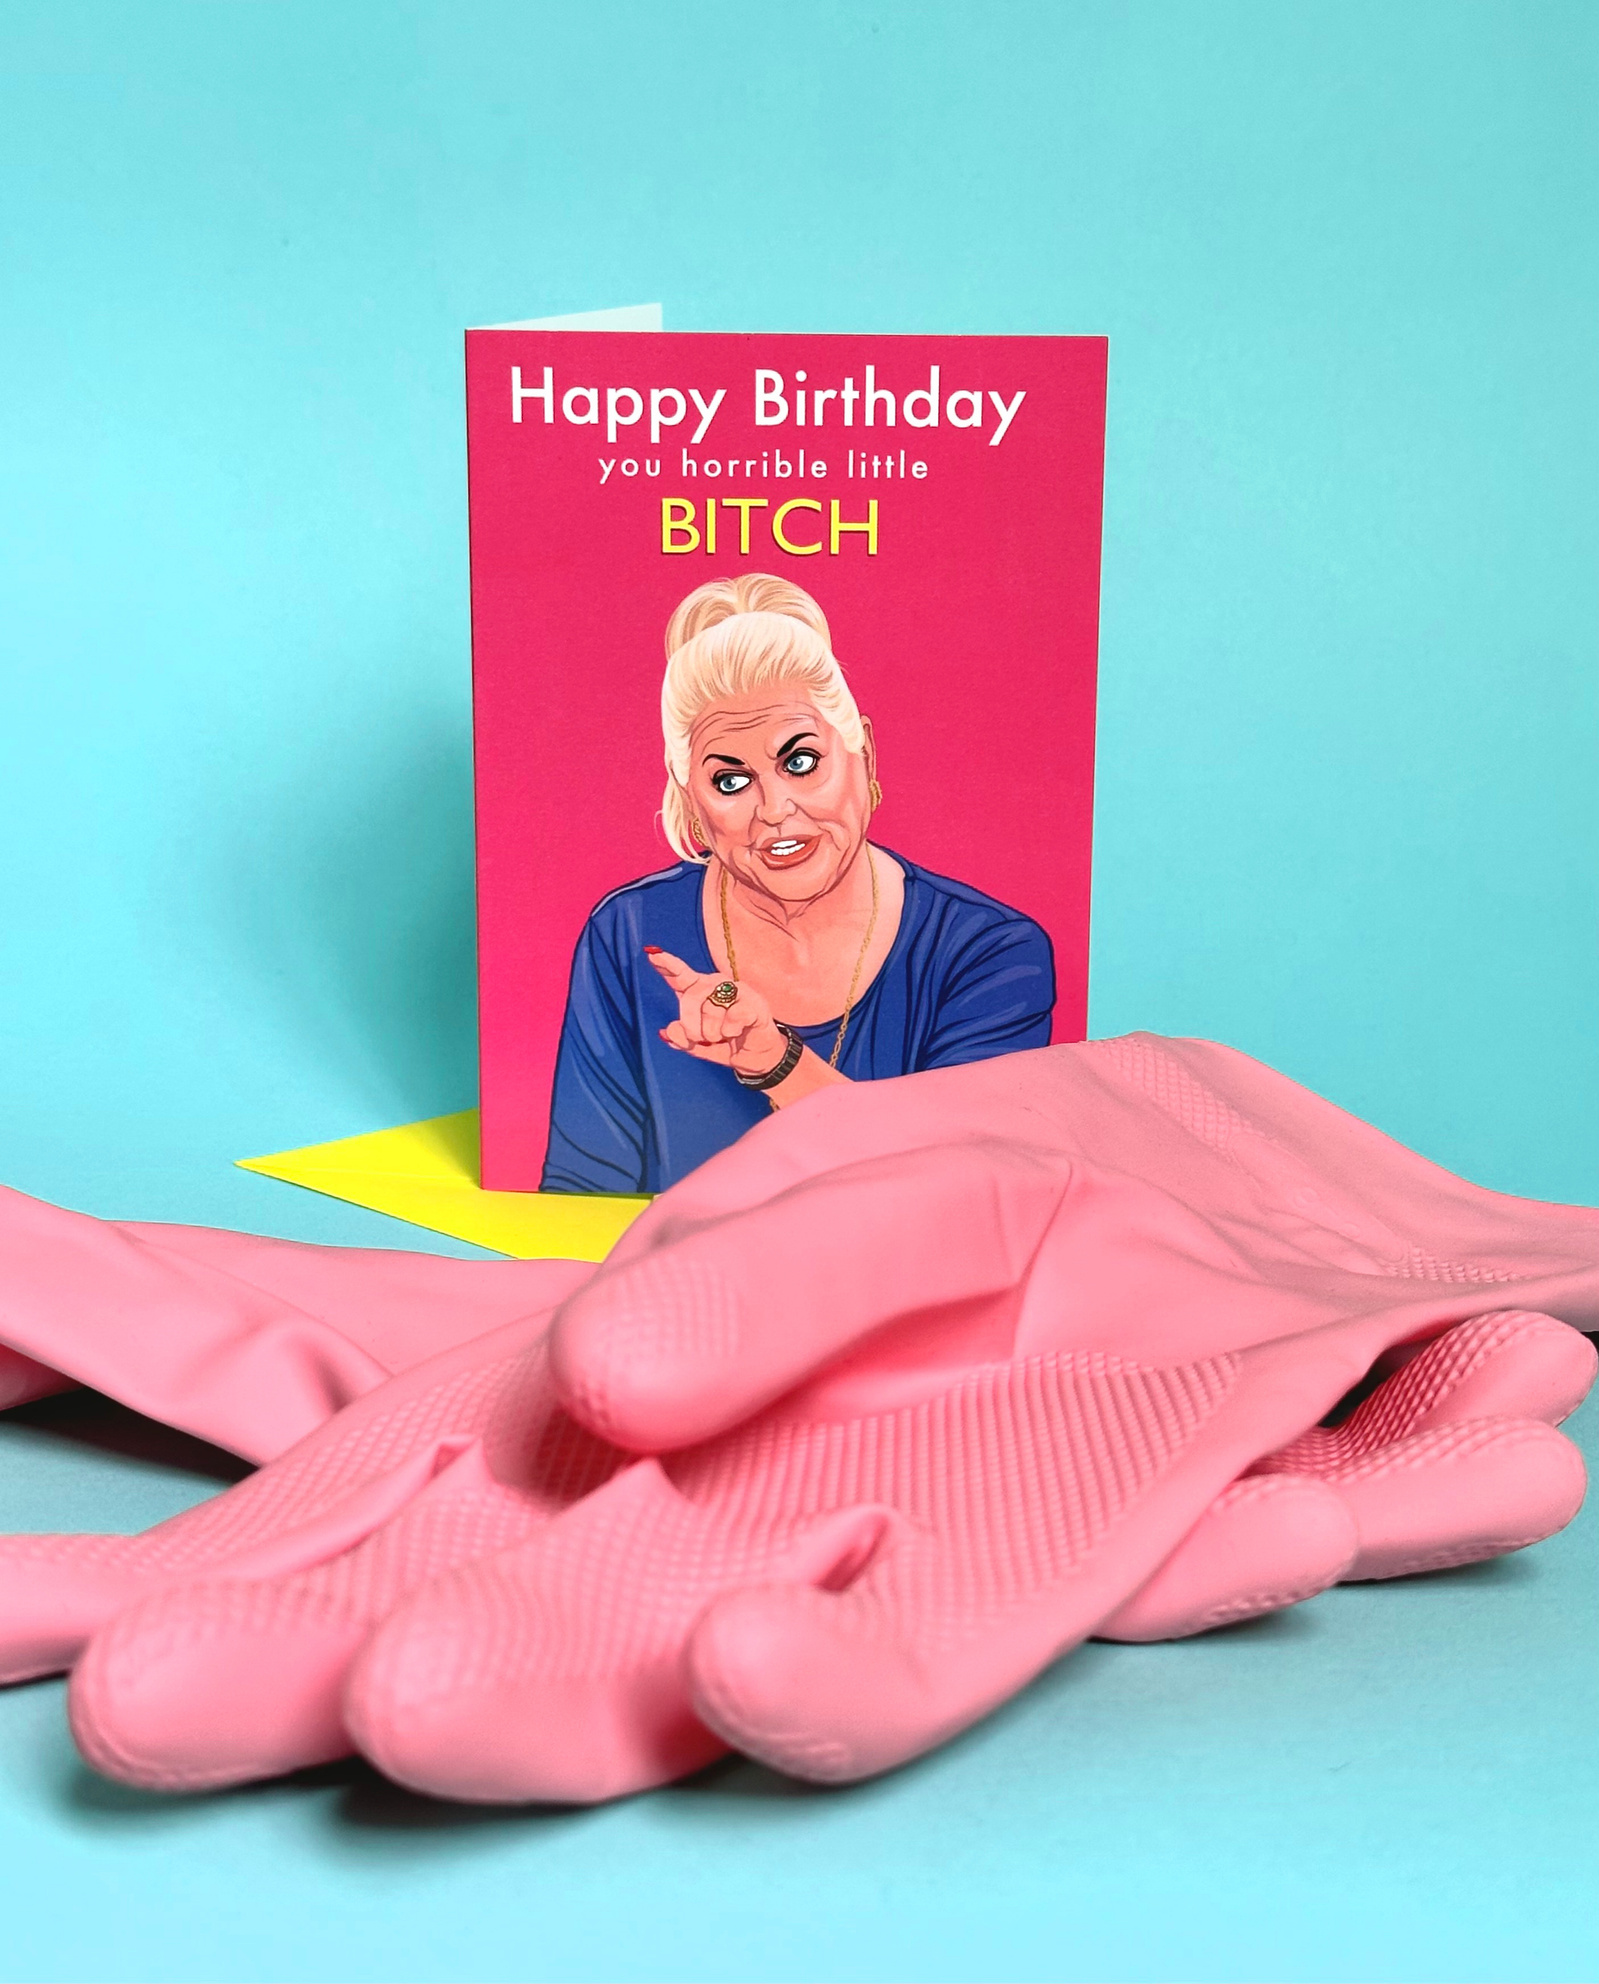 Pink Kim Woodburn A6 Greetings card with yellow envelope by Ryan Hodge illustration.  Funny card, celebrity cleaner and bitch.  